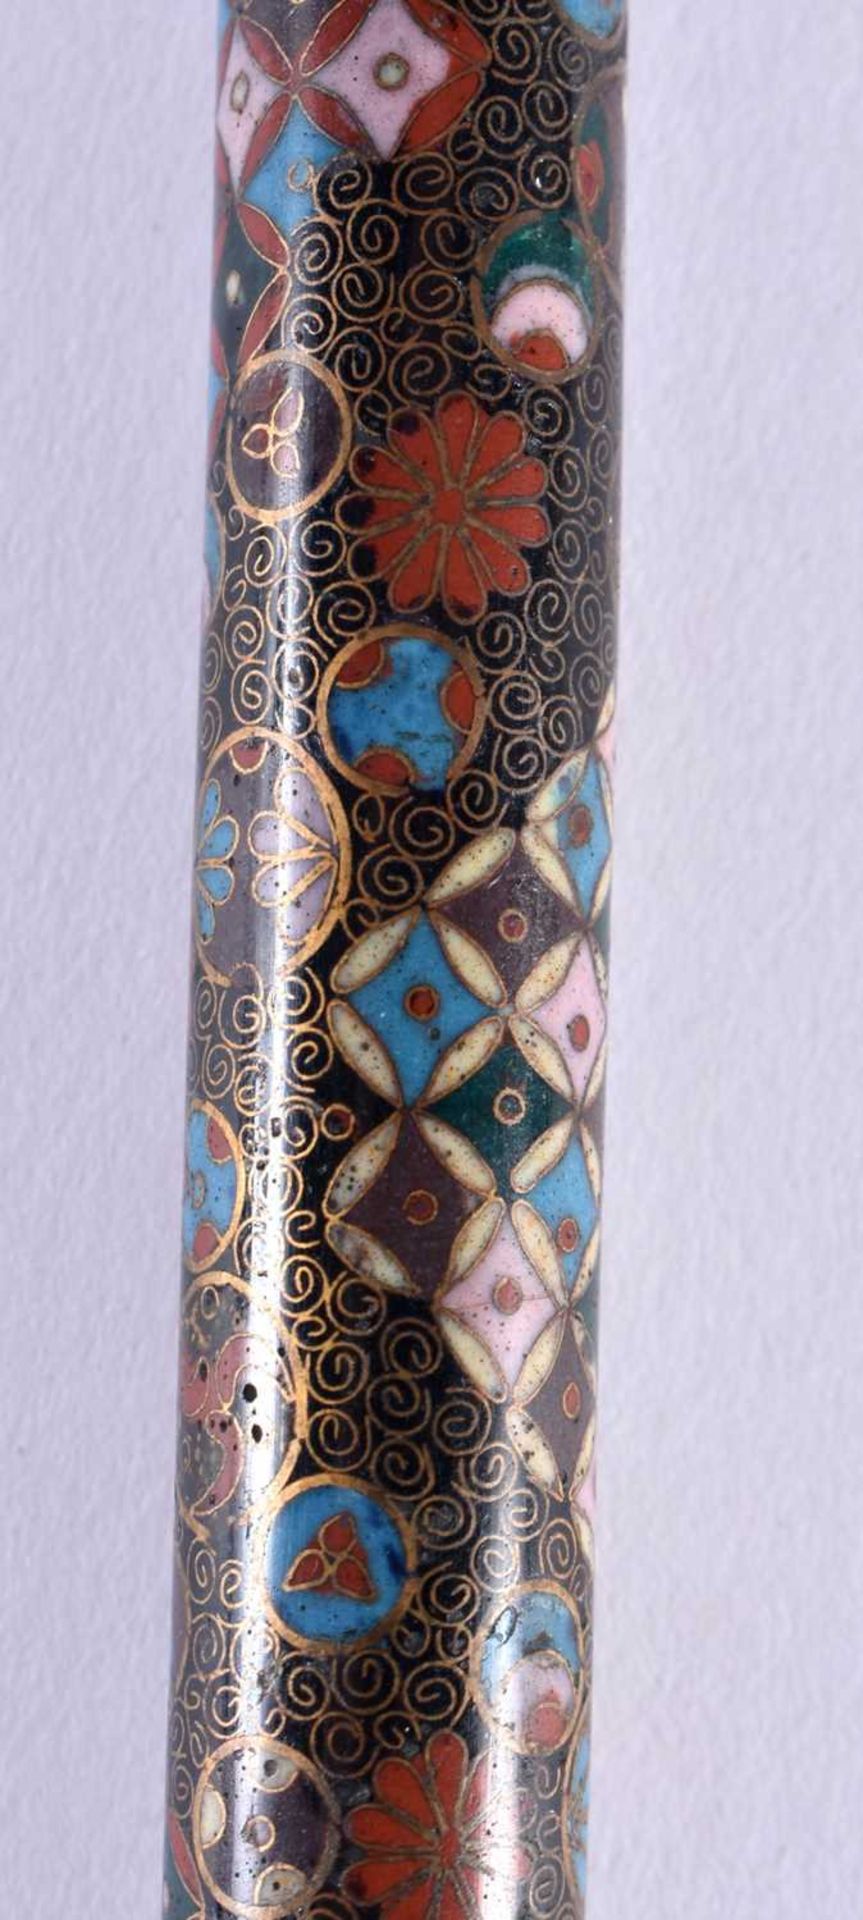 A FINE 19TH CENTURY JAPANESE MEIJI PERIOD CLOISONNE ENAMEL CANE HANDLE decorated with circular and - Image 3 of 6